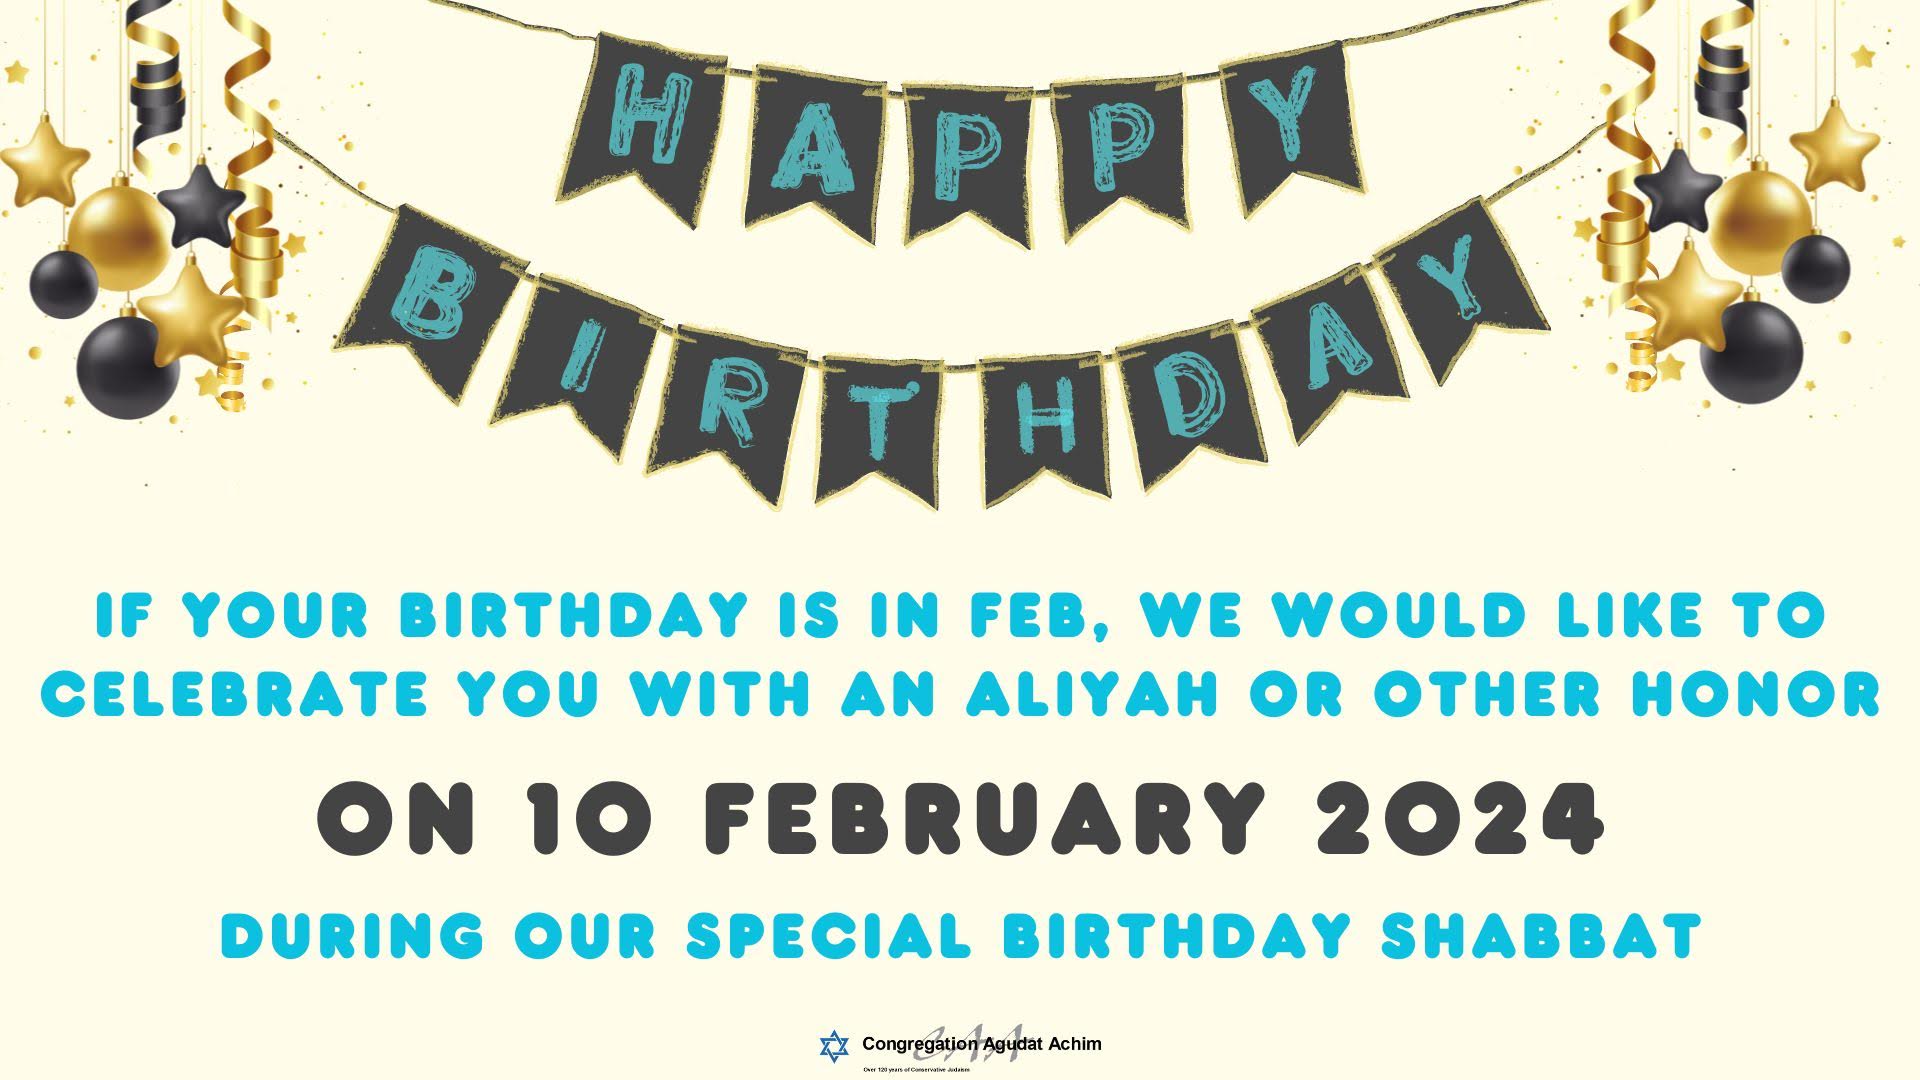 Celebrate and attend Shabbat morning services in February as we honor our congregants' birthdays